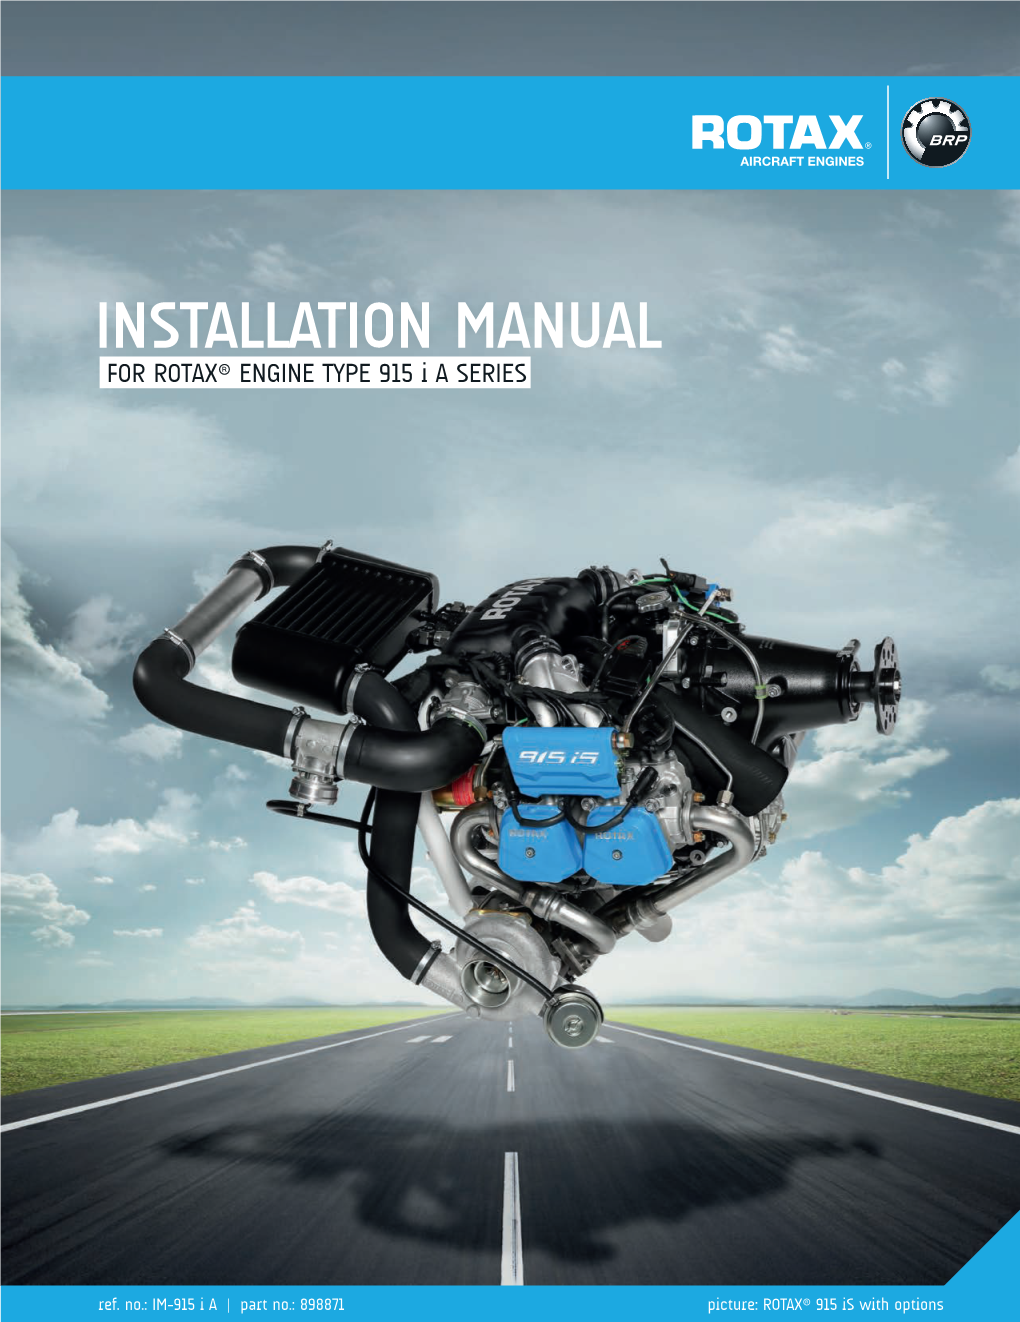 INSTALLATION MANUAL for ROTAX® ENGINE TYPE 915 I a SERIES